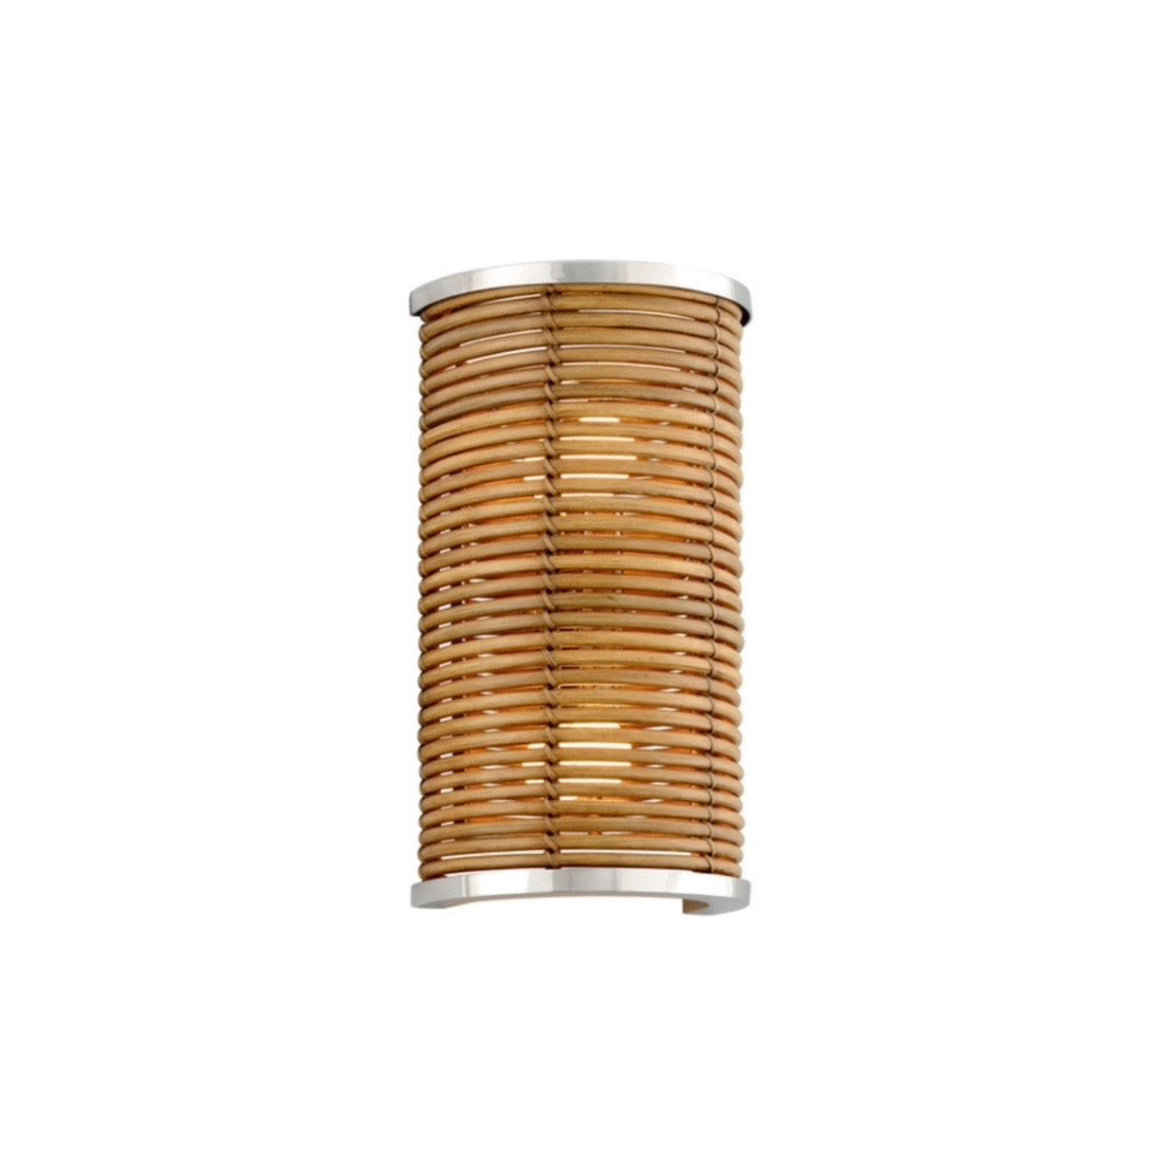 Rattan & Polished Stainless Steel Wall Sconce